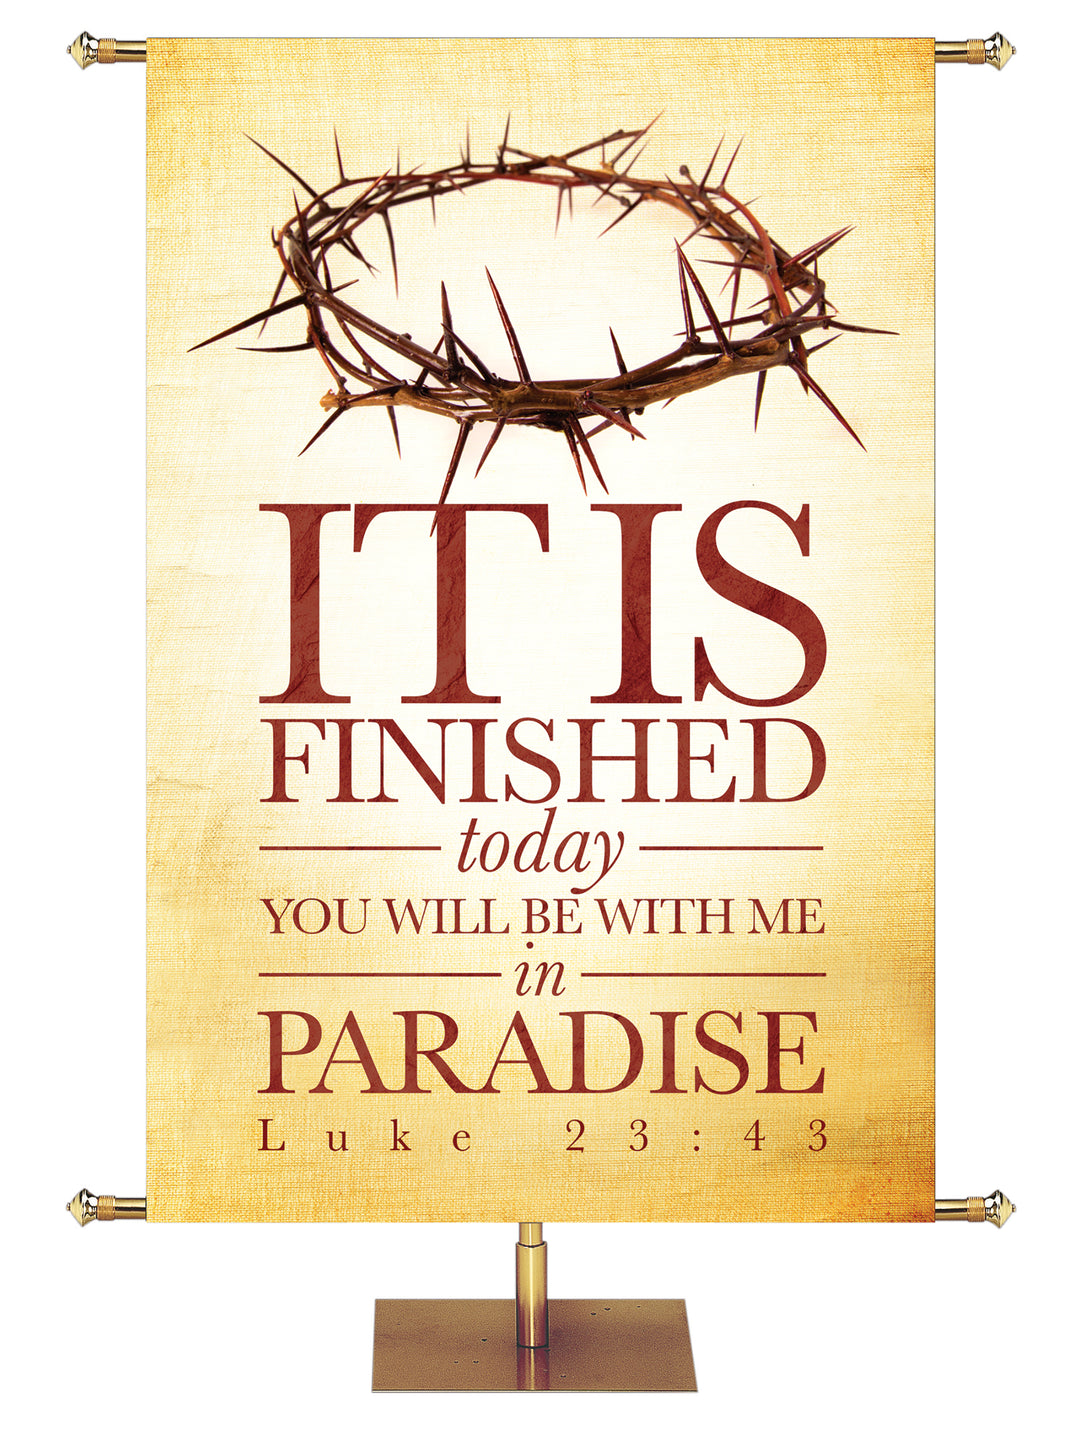 Easter Elegance It Is Finished - Easter Banners - PraiseBanners